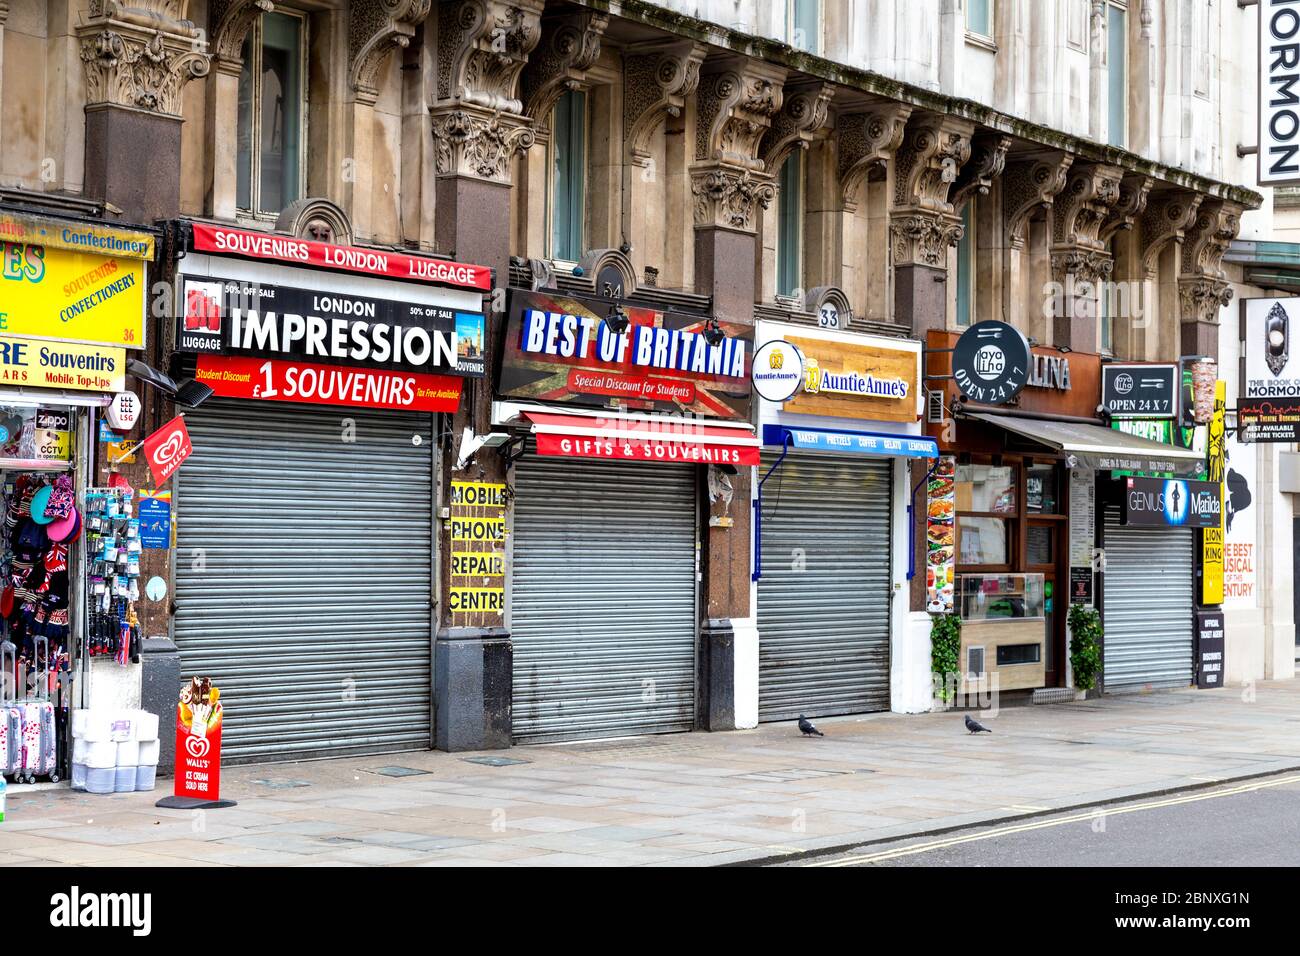 16 May 2020 London, UK - Souvenir shops and Auntie Anne's near Leicester Square shut down during the Coronavirus pandemic lockdown Stock Photo